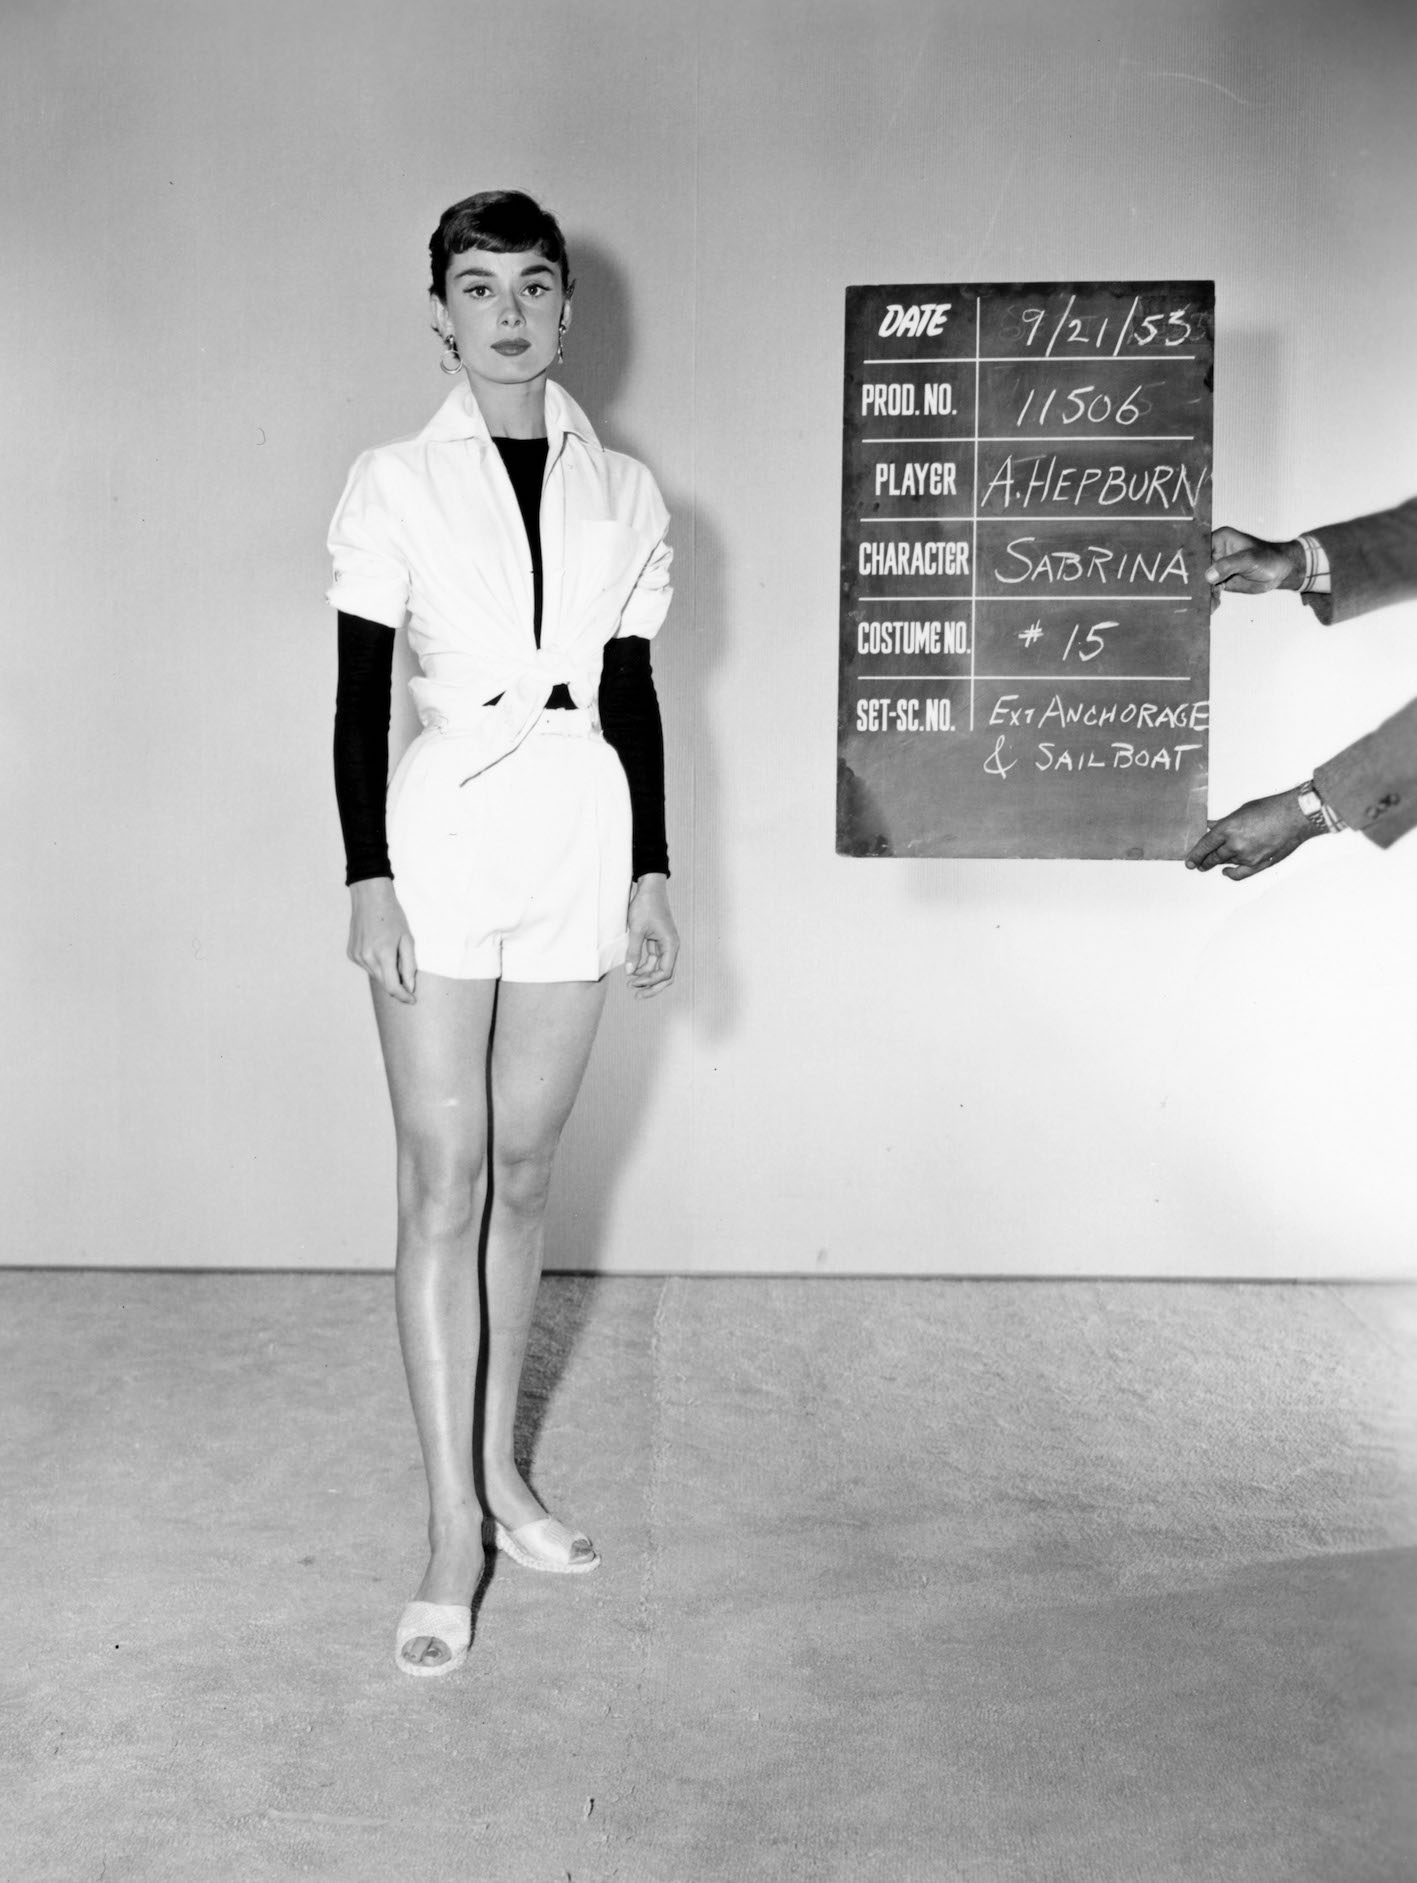 Costume test for Sabrina, Paramount Pictures, 1953